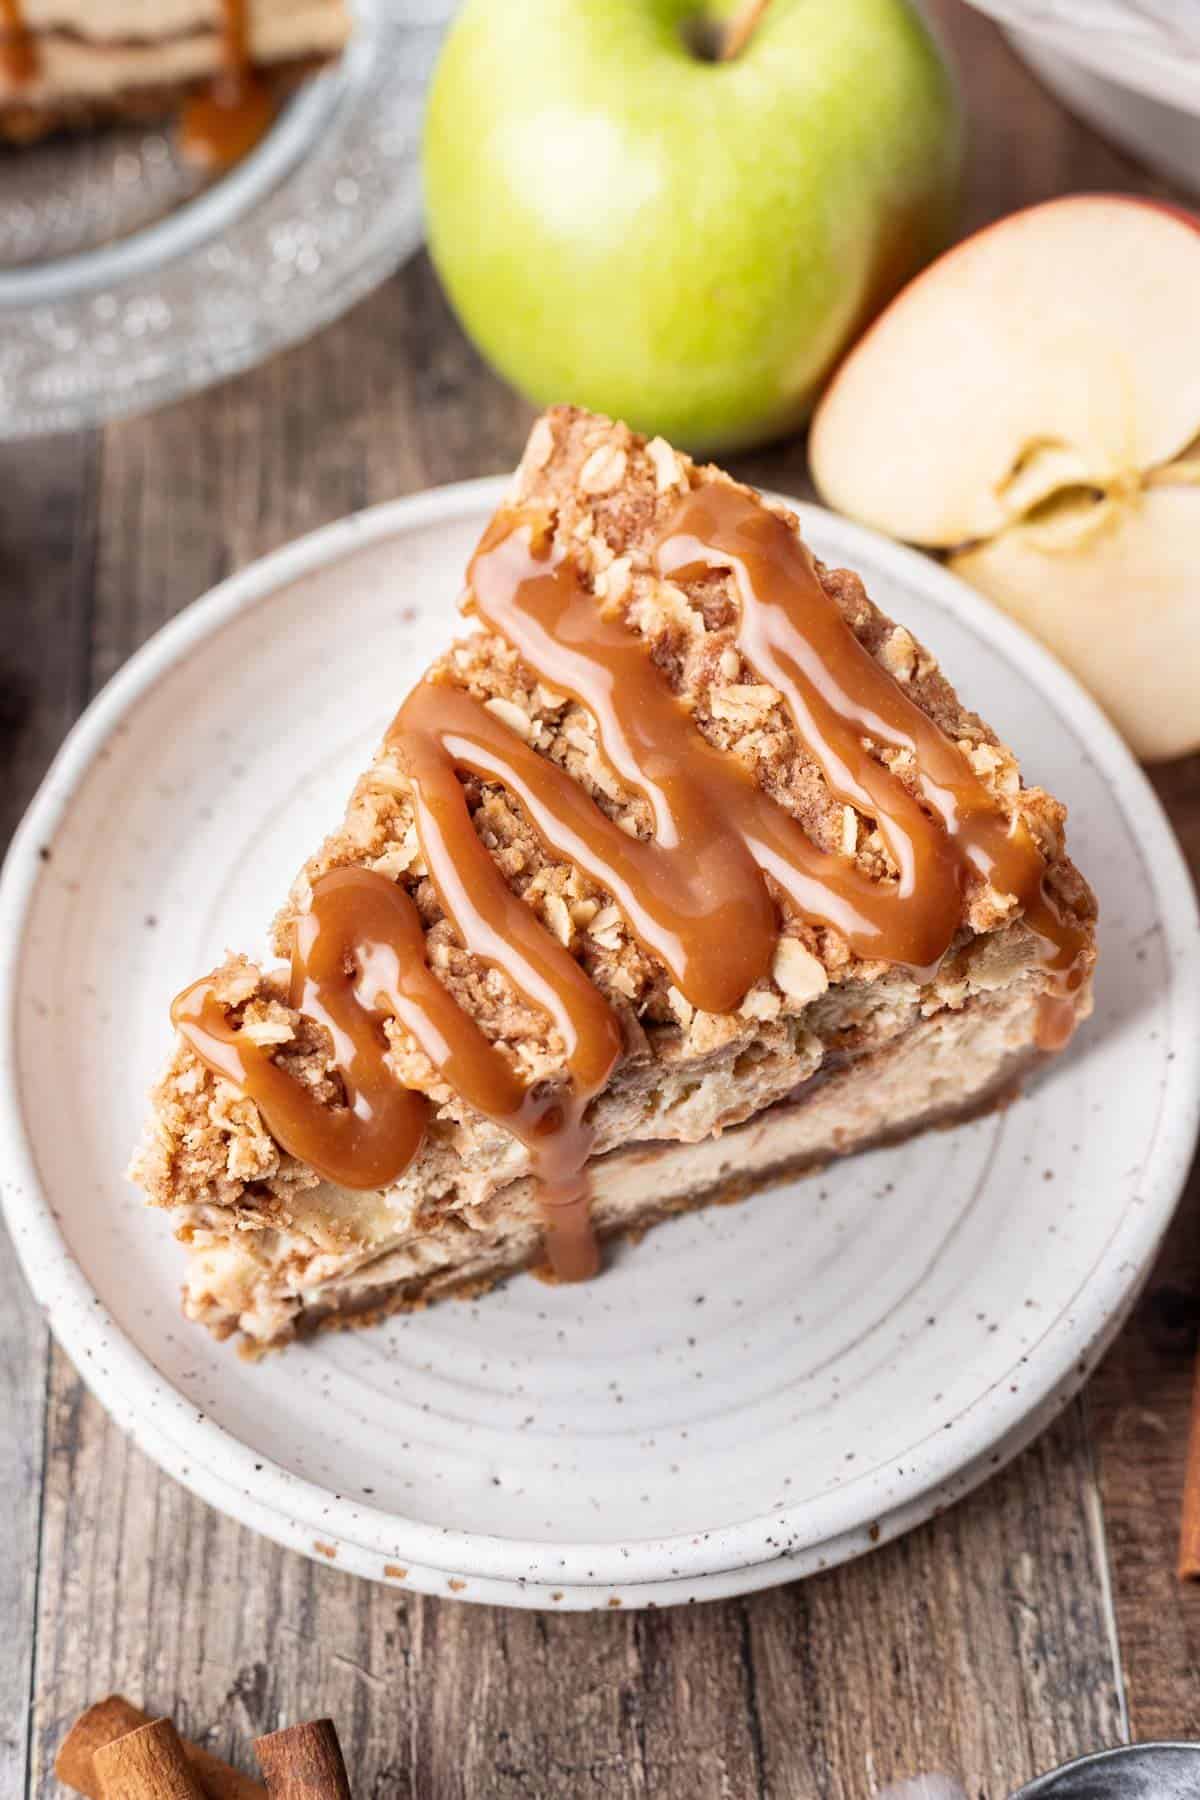 Apple crumble cheesecake drizzled with caramel over top.